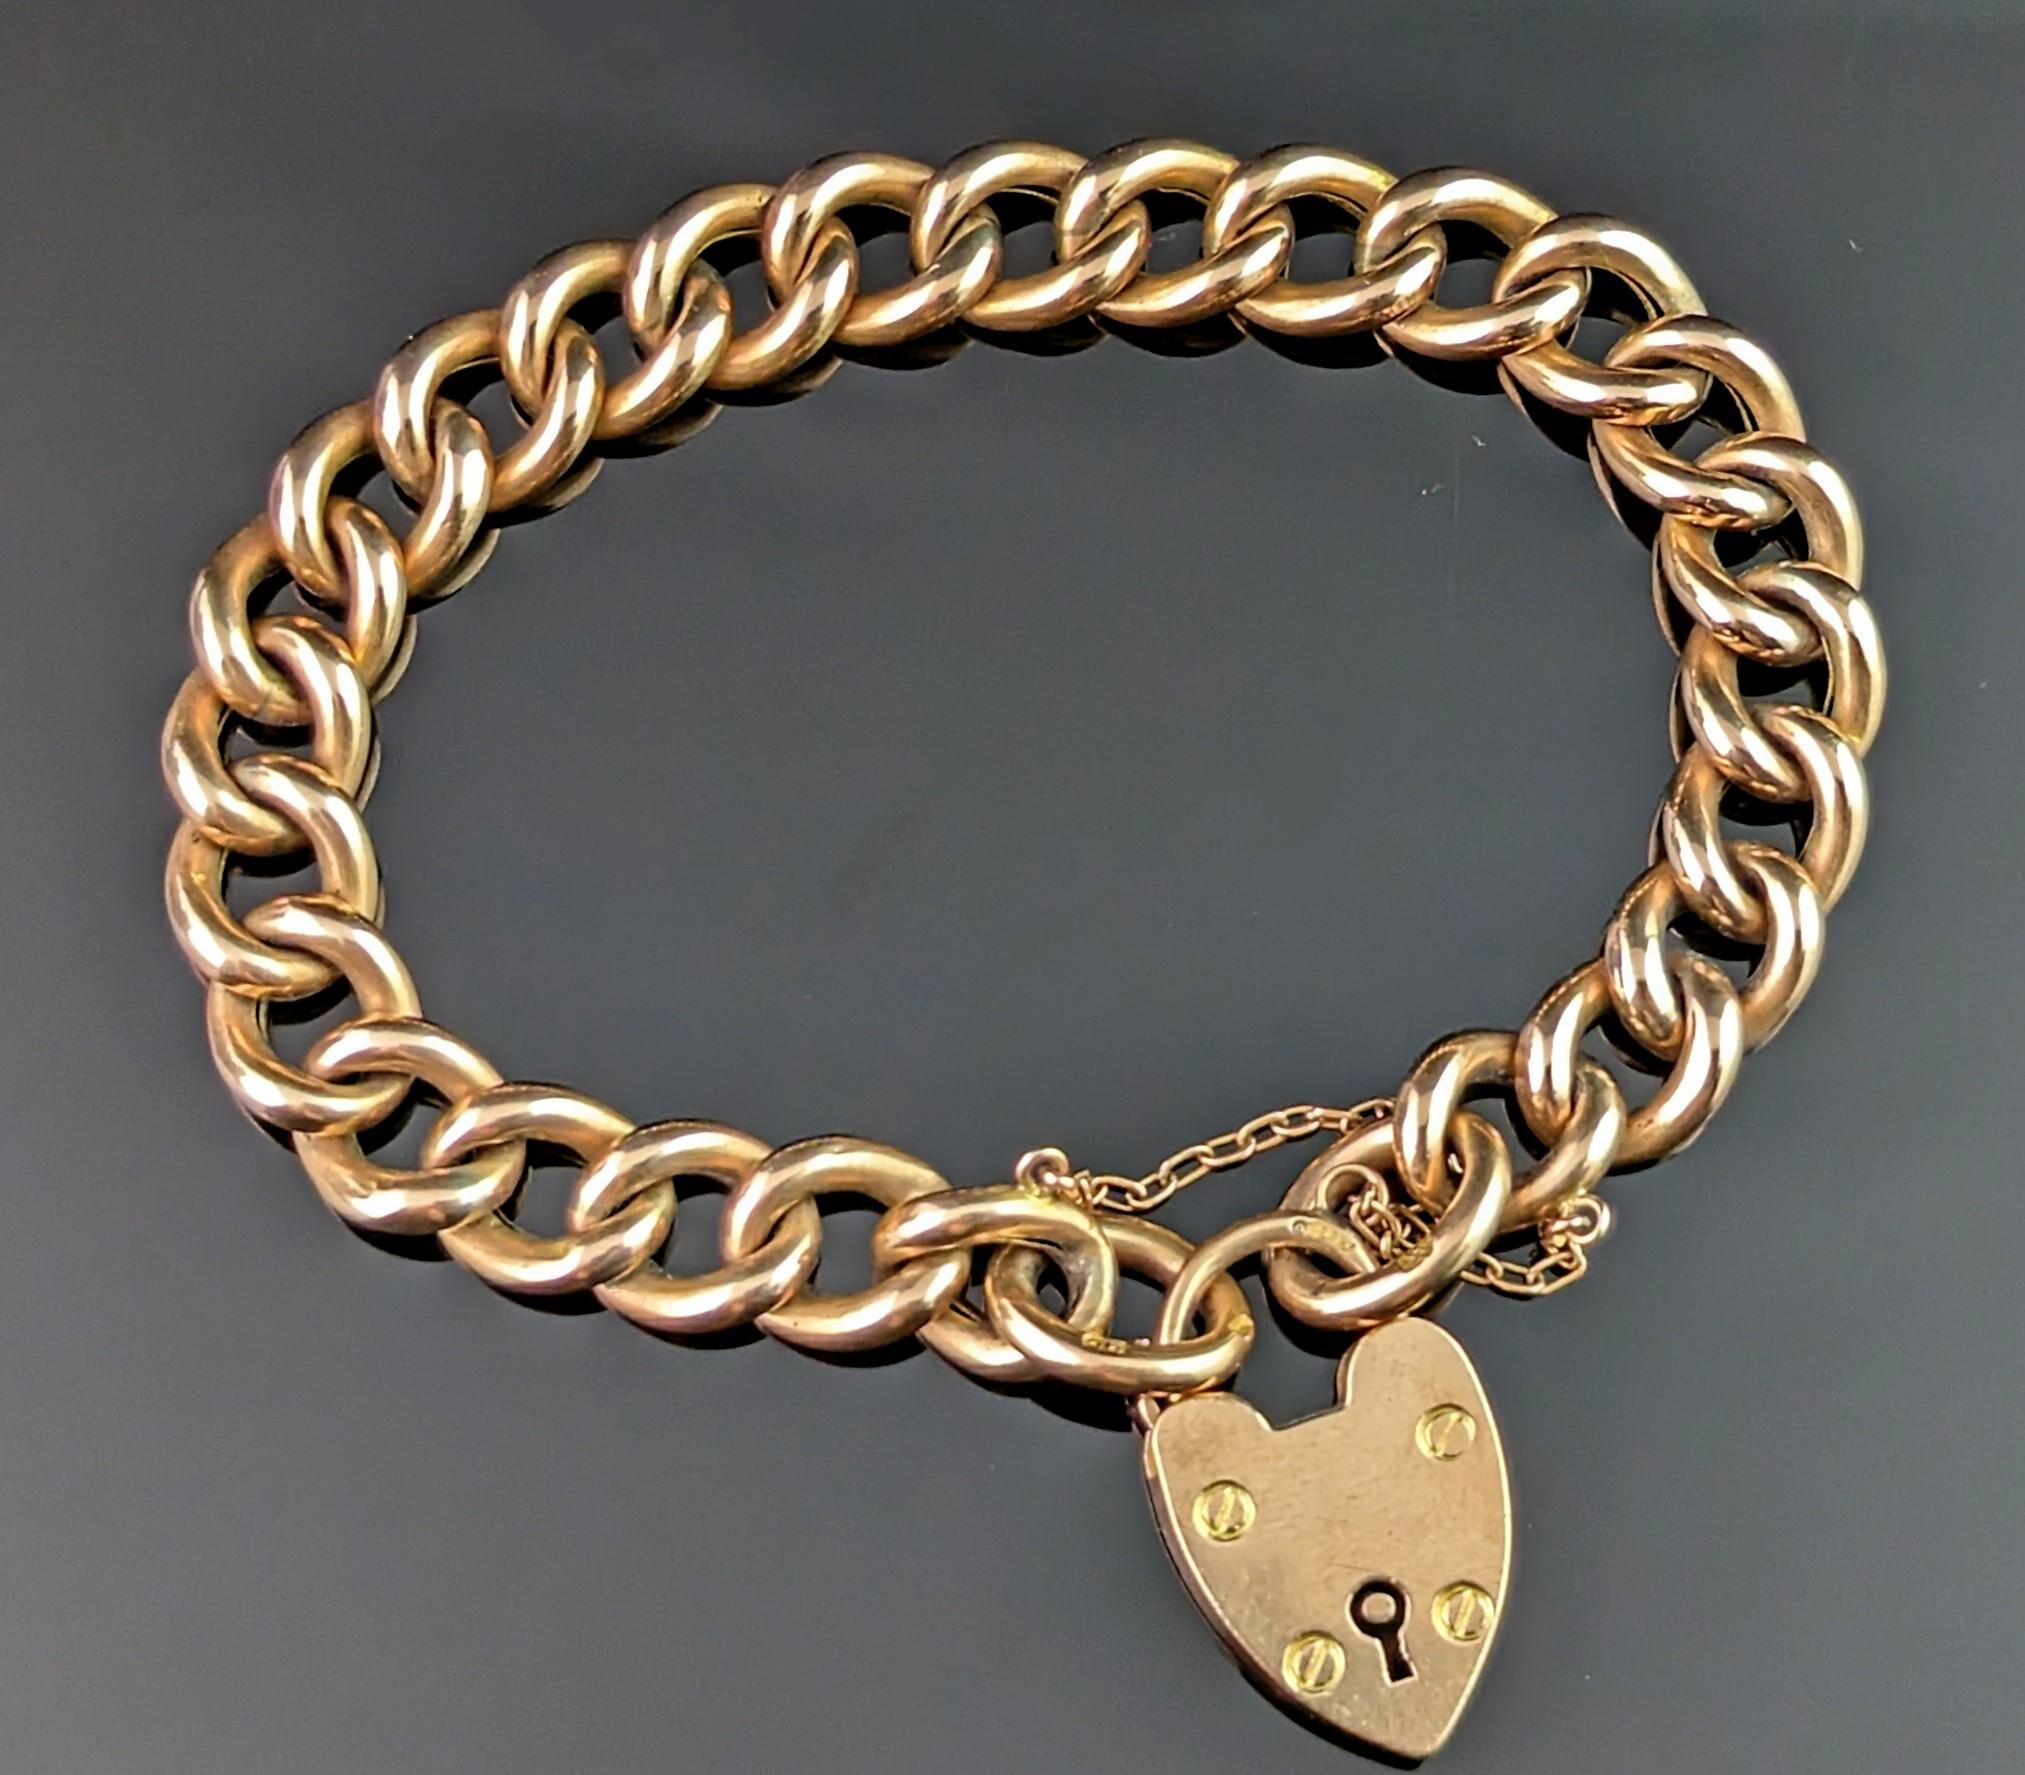 This antique 9ct gold curb link bracelet is both traditional and modern at the same time, made in the early 20th century yet it remains a style that it still relevant today.

If you are looking for a staple curb bracelet for your jewellery